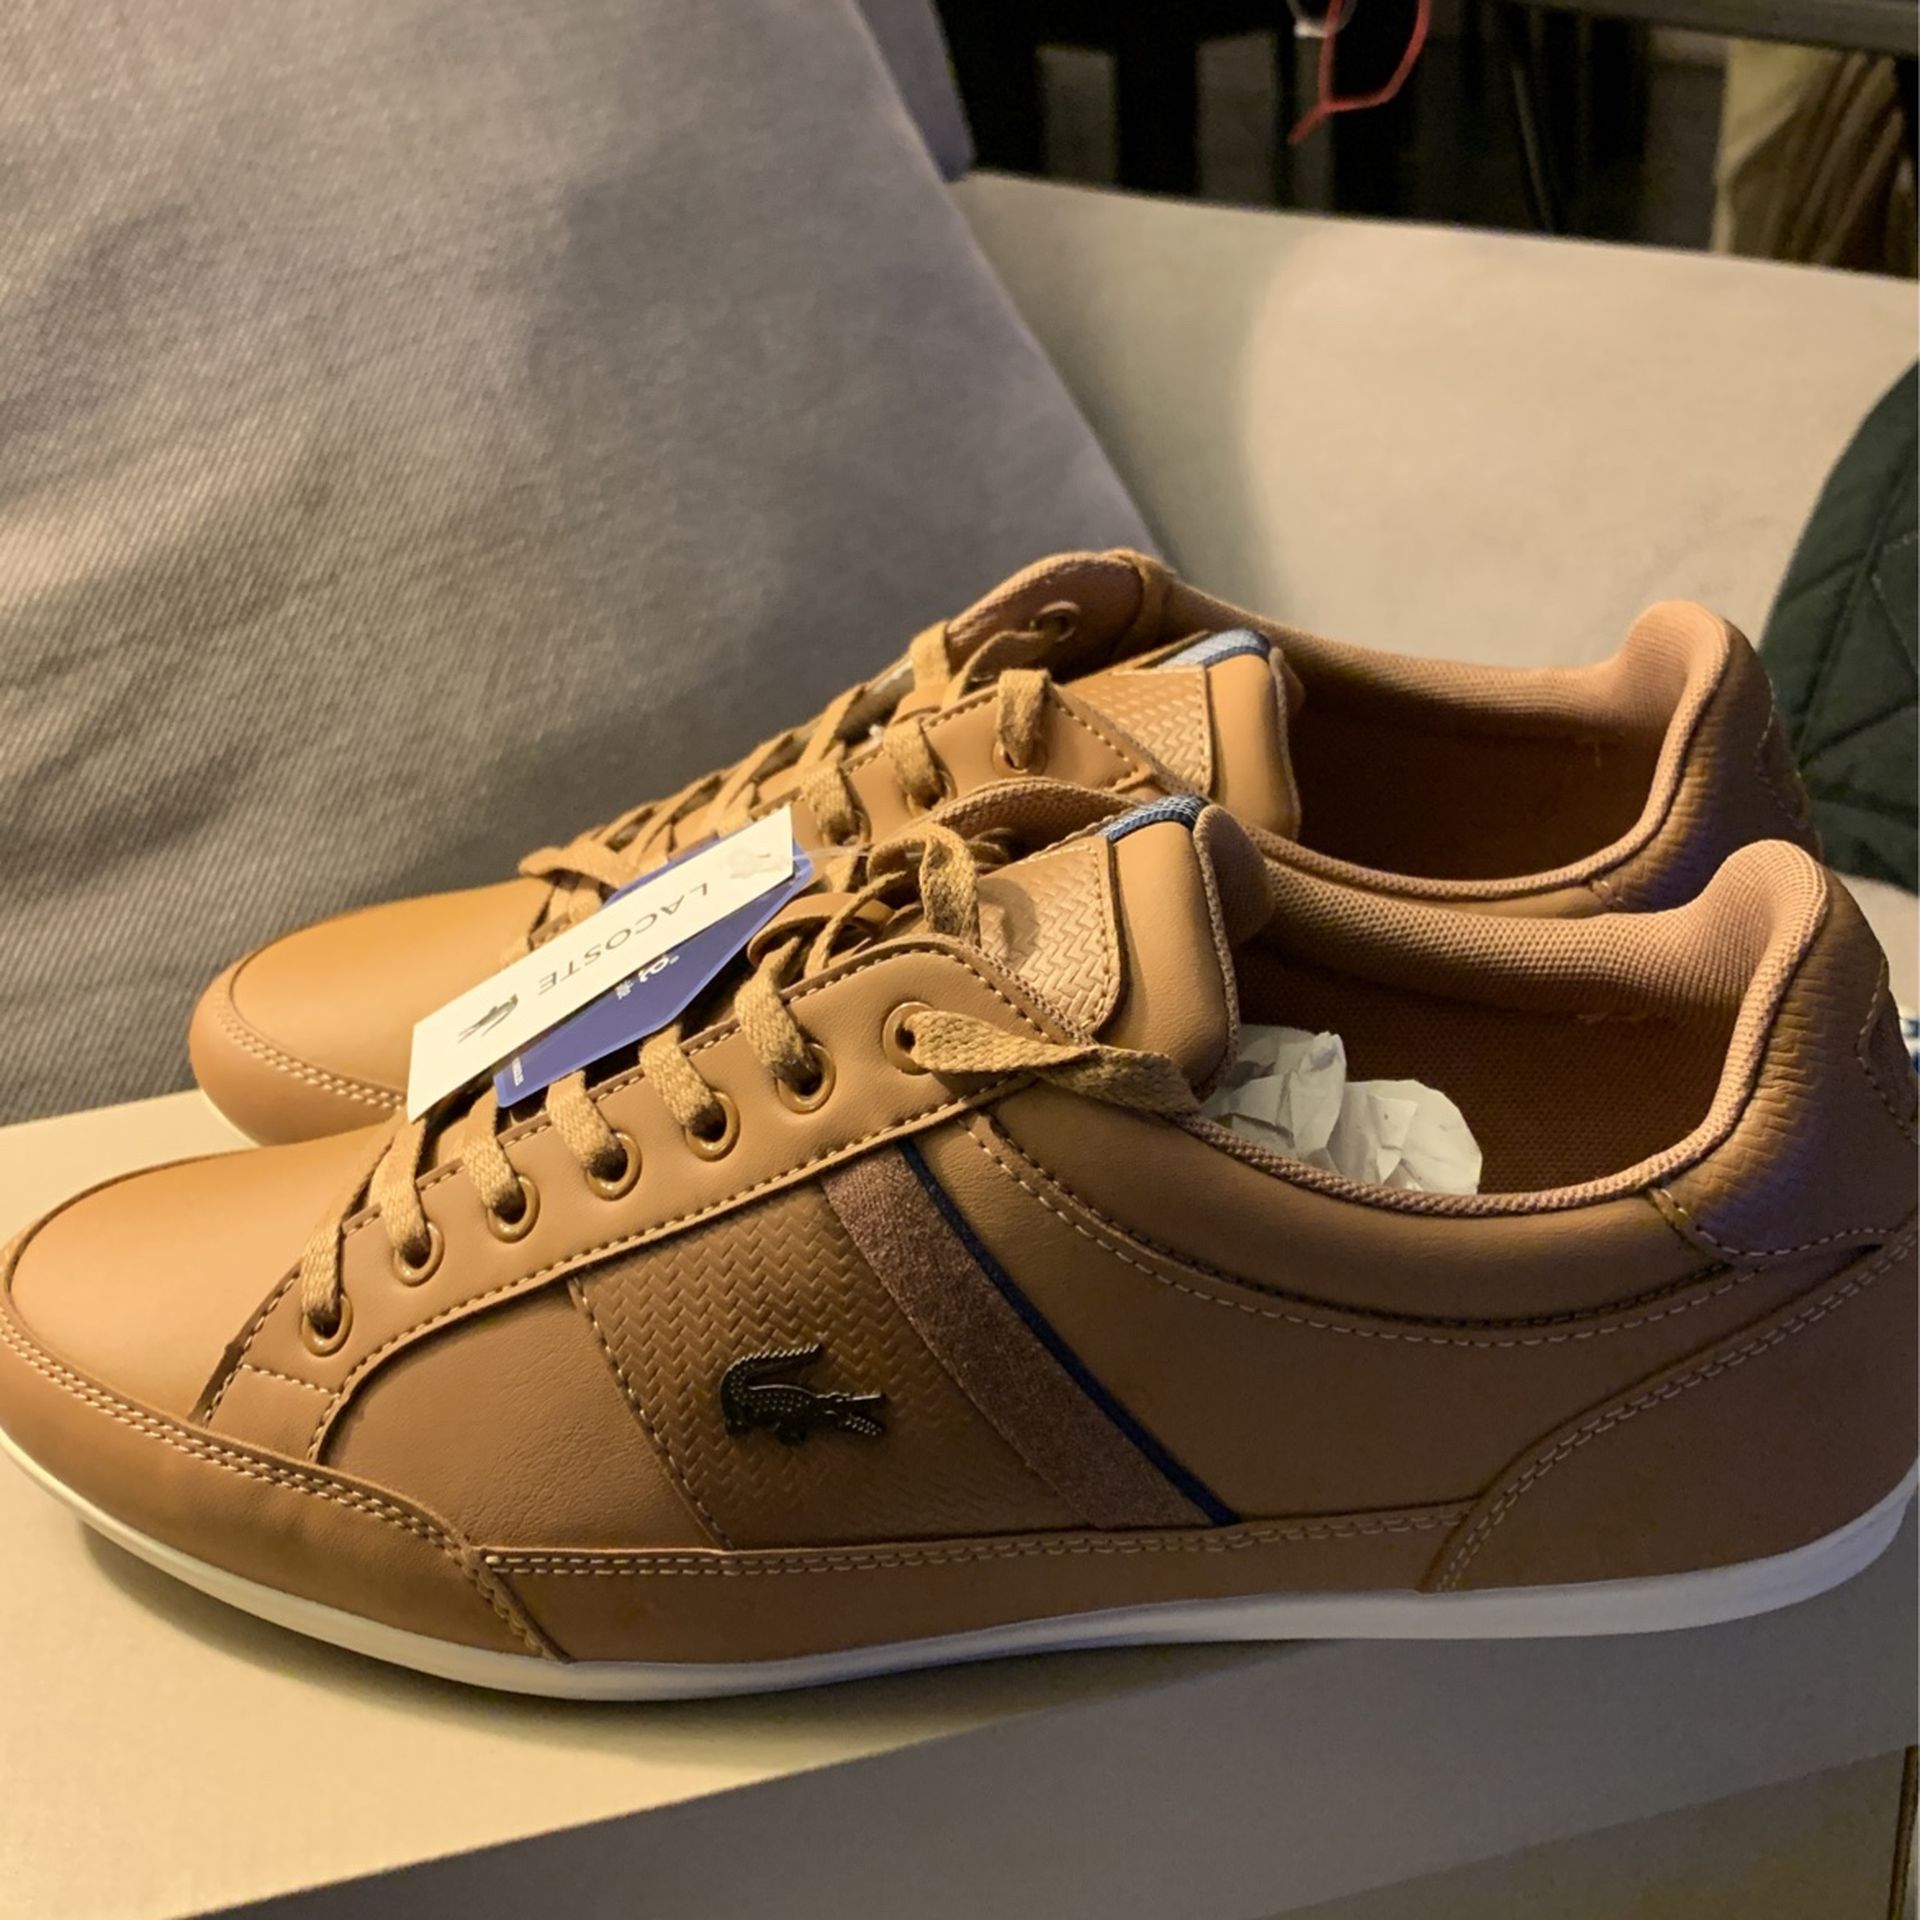 Lacoste Men Shoes USA Size  Never Used for Sale in Pomona, CA - OfferUp